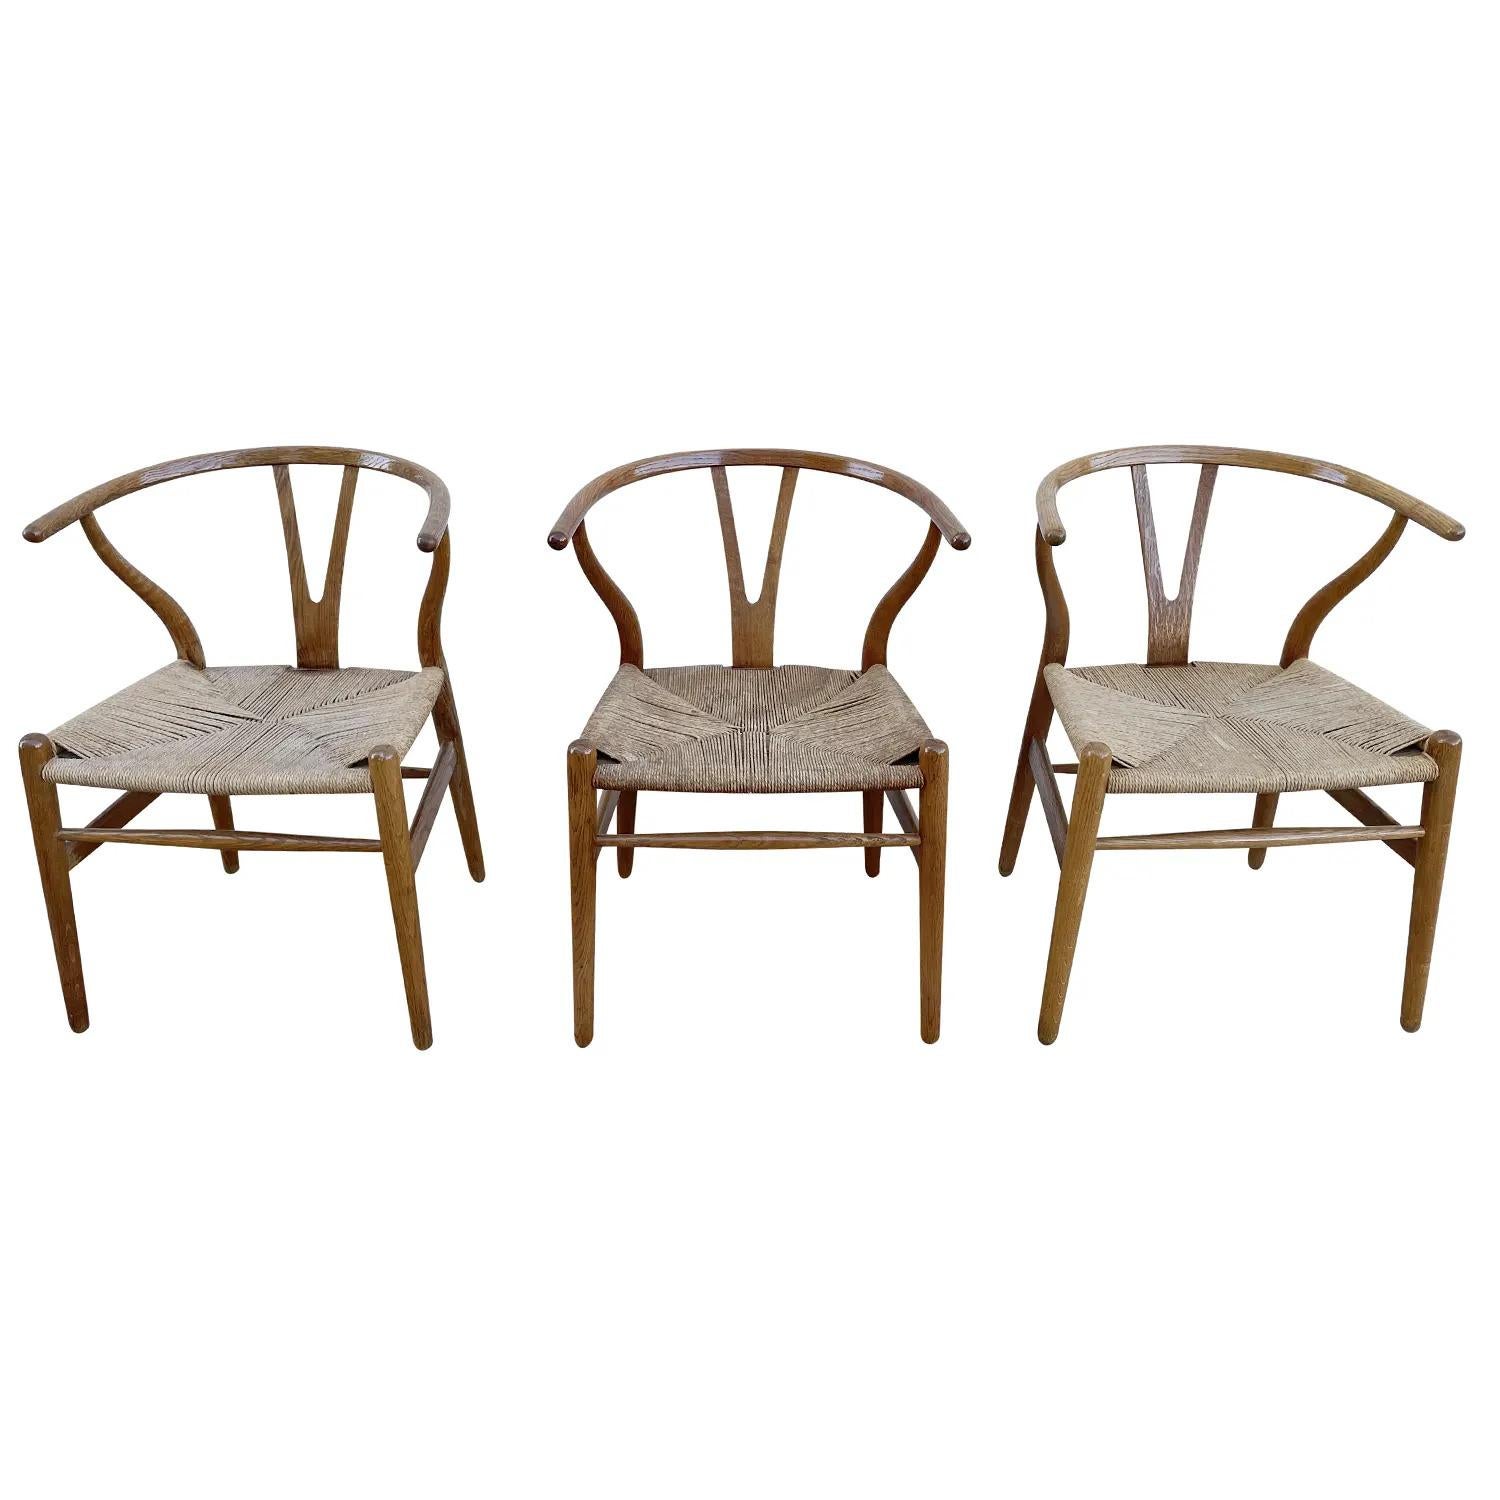 A light-brown, vintage Mid-Century Modern Danish set of three Wishbone chairs made of hand carved Oakwood, designed by Hans J. Wegner and produced by Carl Hansen & Søn, in good condition. The Scandinavian Y-shaped, armchairs have a curved slim